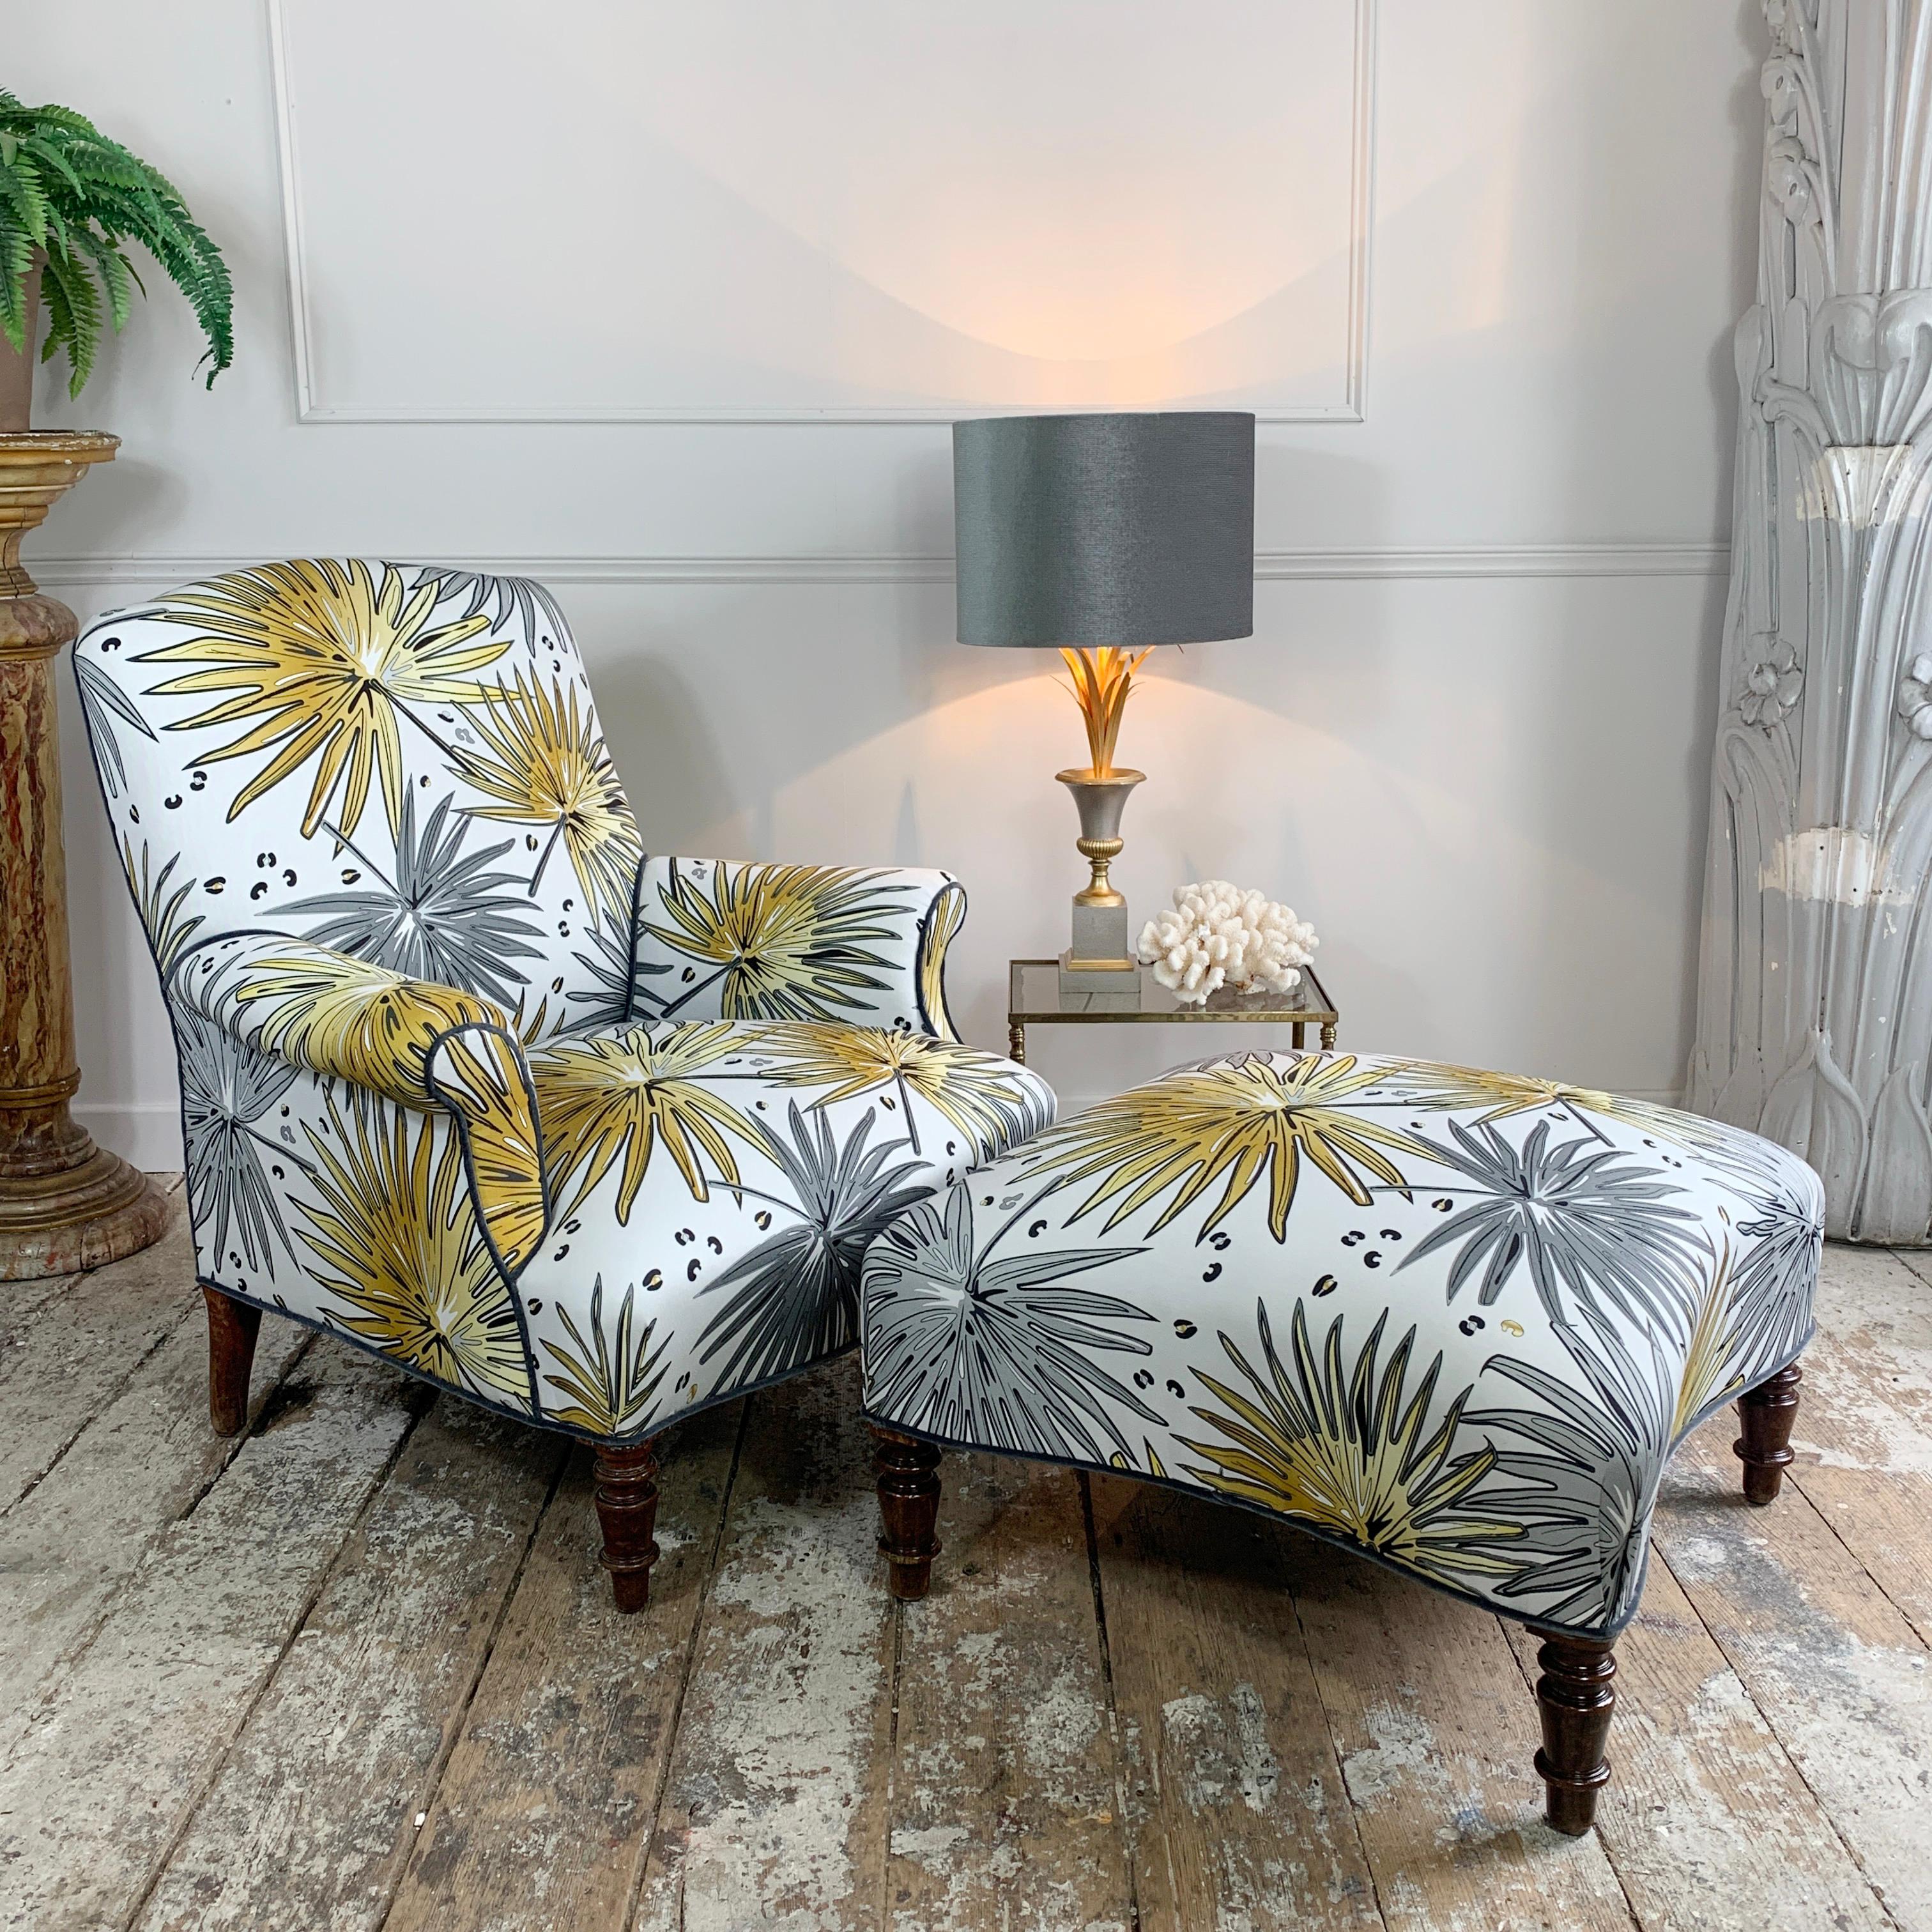 A beautiful 19th century French Napoleon lll armchair and footstool, upholstered in our exclusive Tropics 'Fan Palm' fabric.

This stunning Armchair and Footstool dating from around 1860, have been painstakingly covered in the luxurious Fan Palm